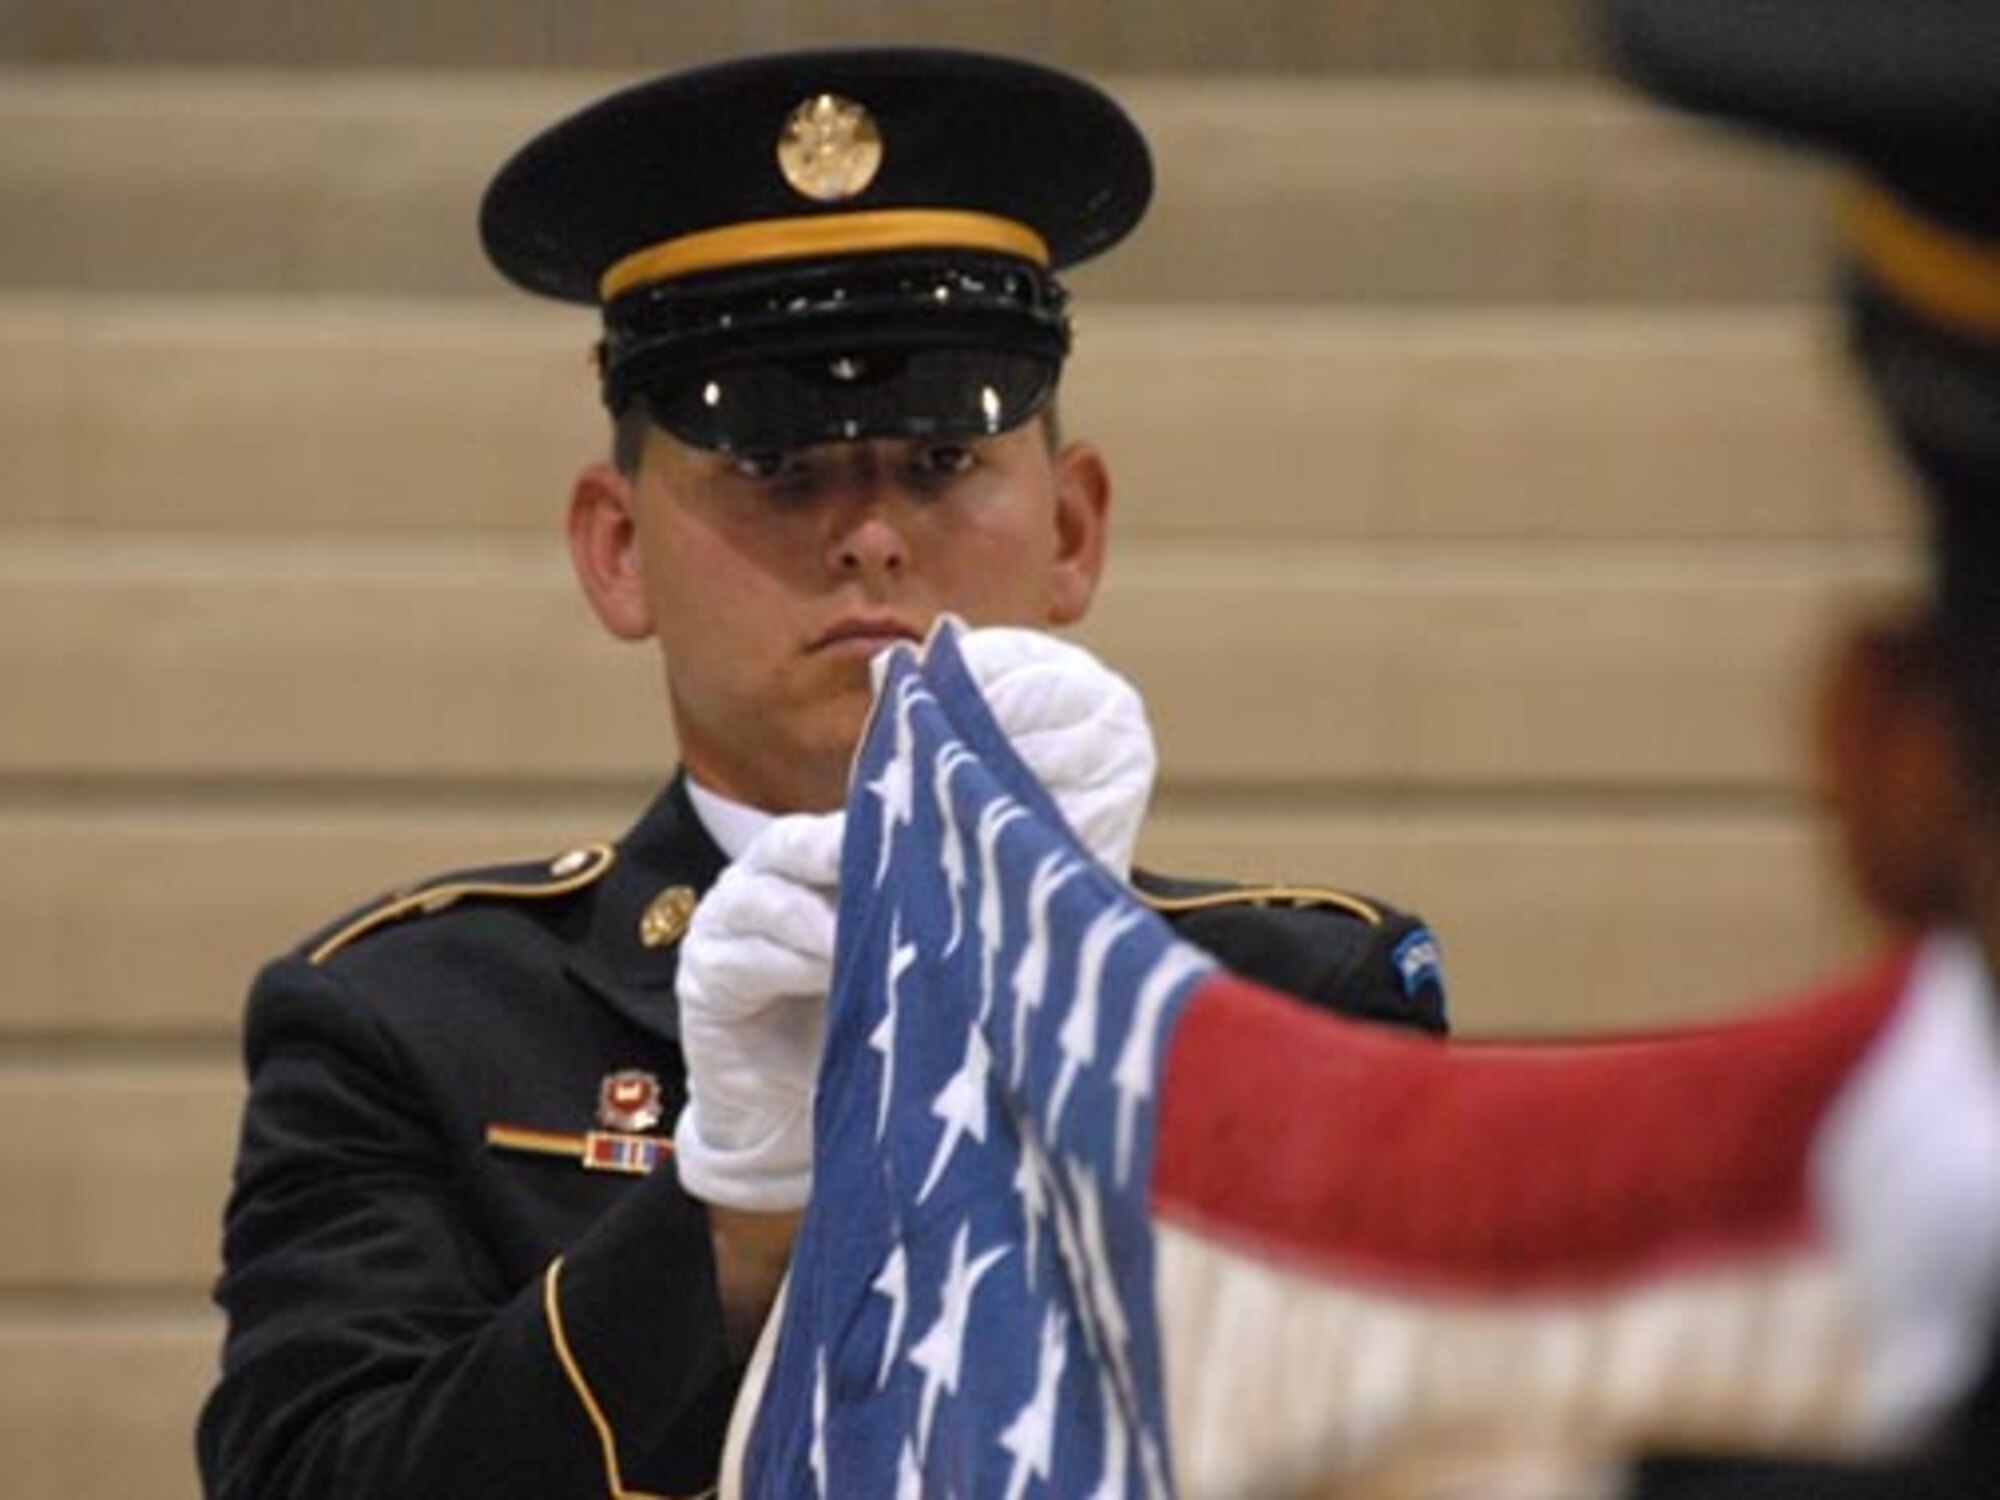 SPC David Saari, North Dakota Army National Guard, folds the United States flag during military funeral honors team training at the Armed Forces Reserve Center, Fargo, N.D., August 17, 2007.  (USAF photo/SMSgt. David Lipp)
